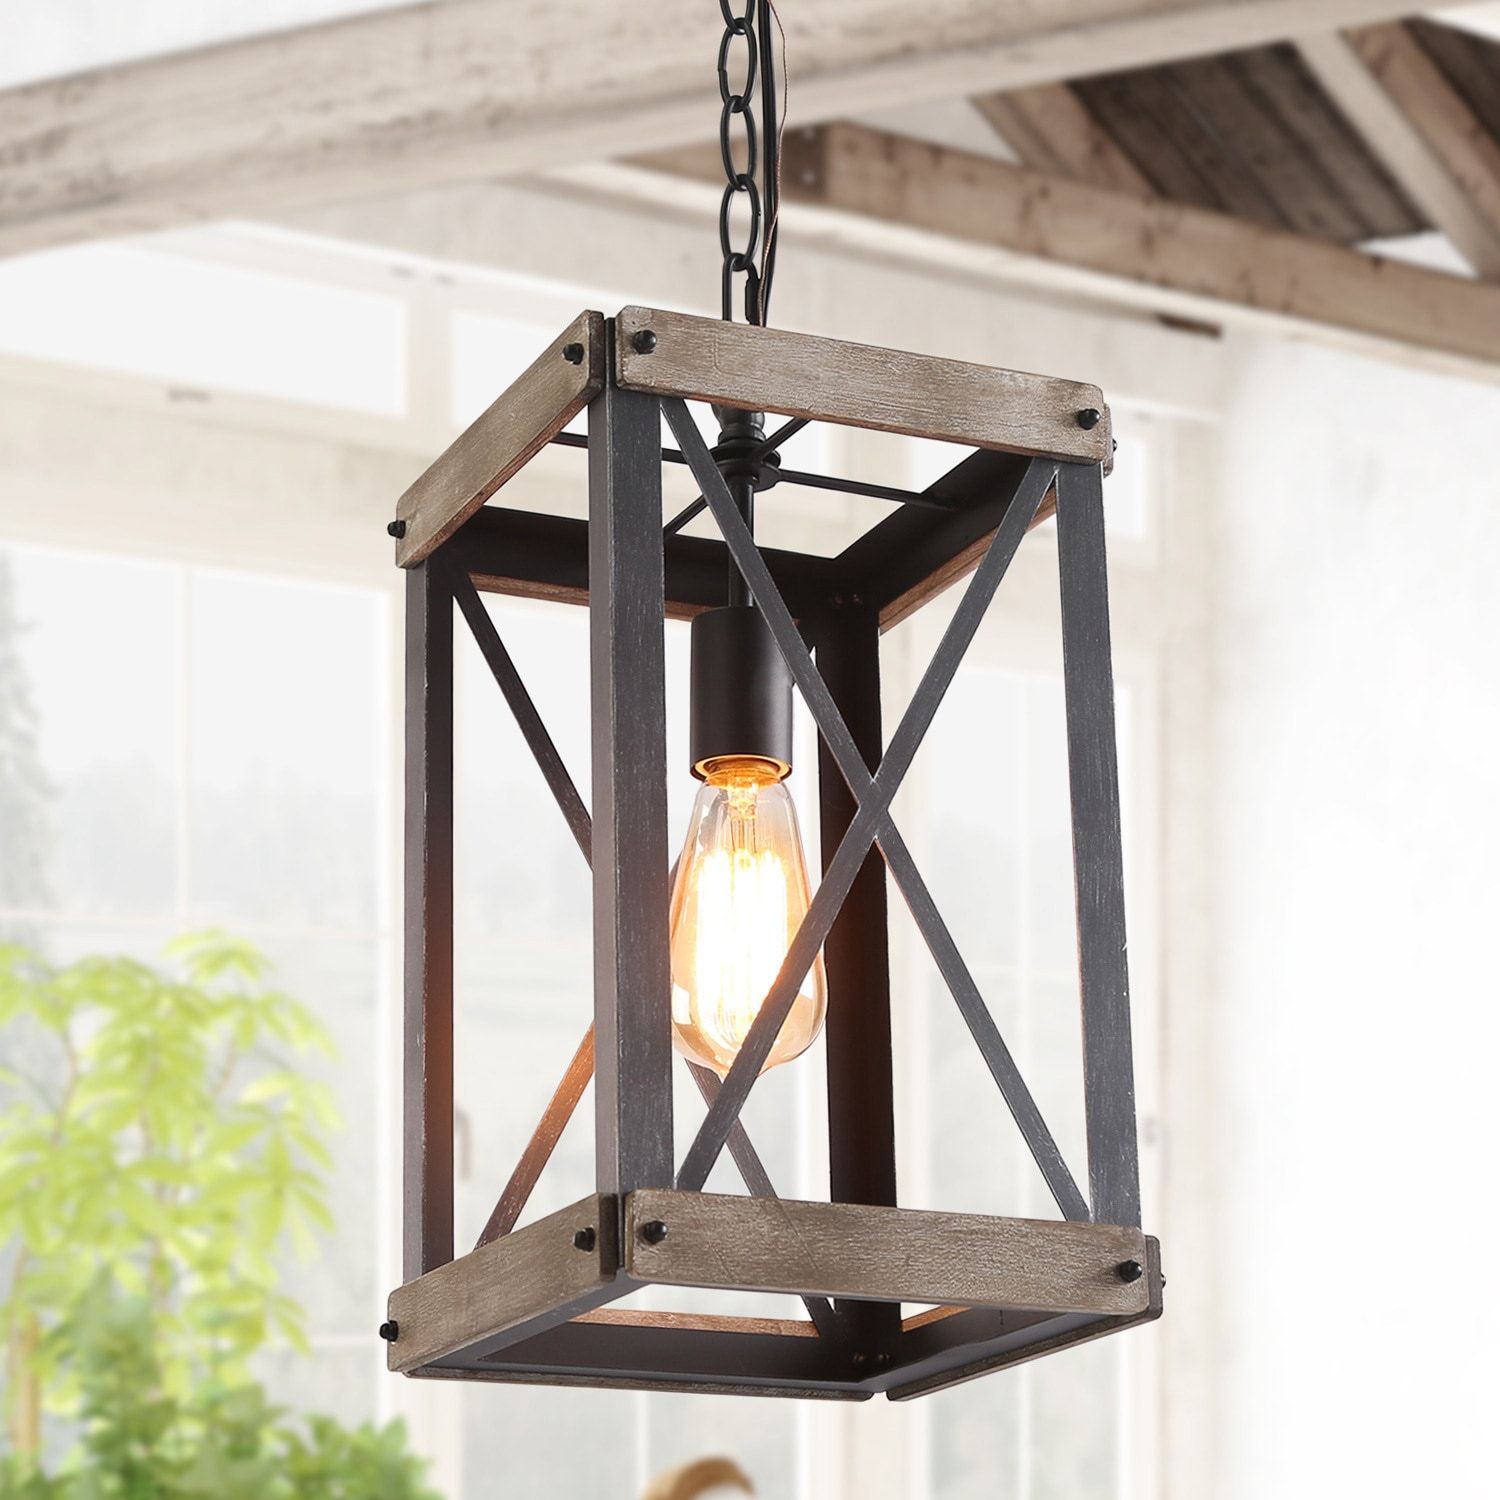 Lnc Laius Solid Pine Wood And Matte Black Farmhouse Lantern Led Mini  Kitchen Island Light In The Pendant Lighting Department At Lowes Regarding Rustic Black Lantern Chandeliers (View 3 of 15)